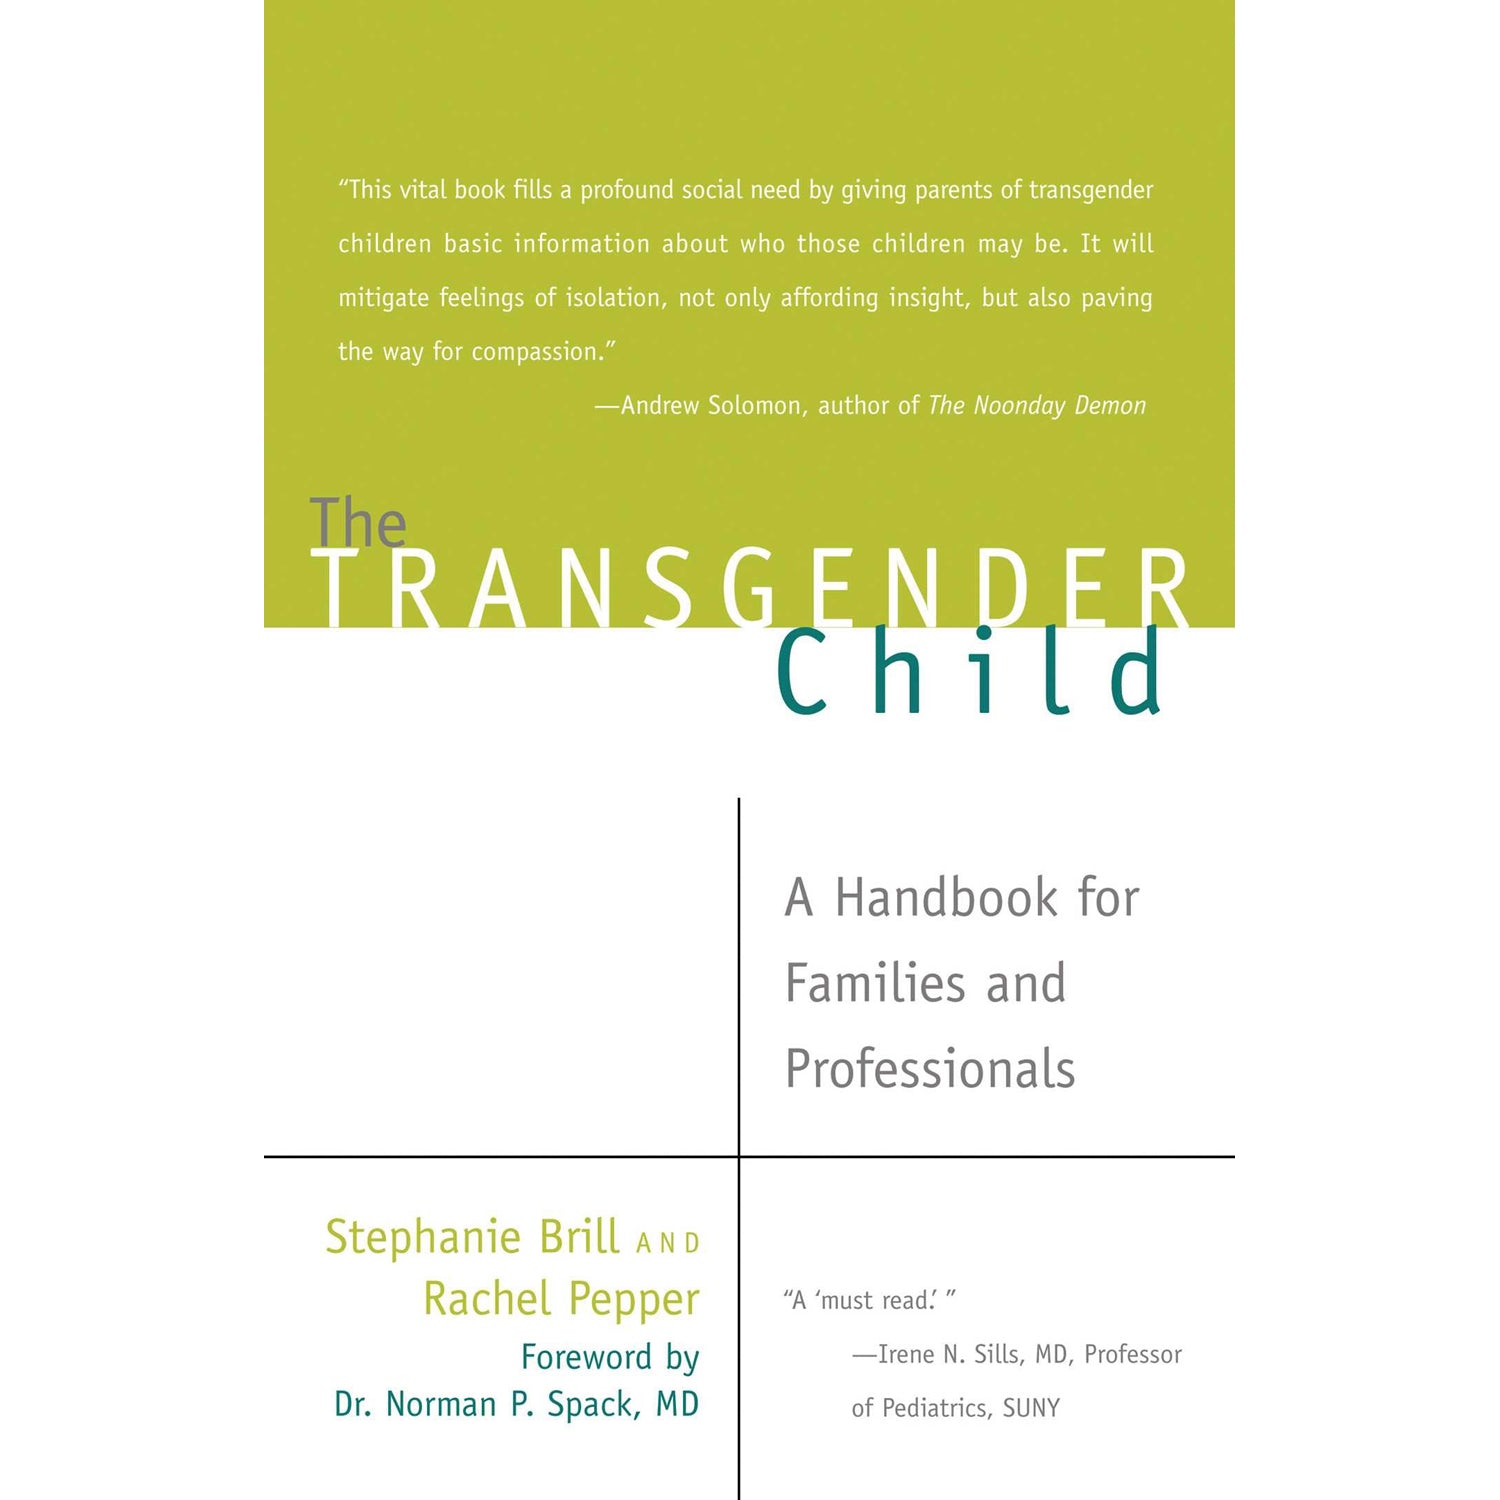 The Transgender Child: A Handbook for Families and Professionals by Stephanie A Brill and Rachel Pepper